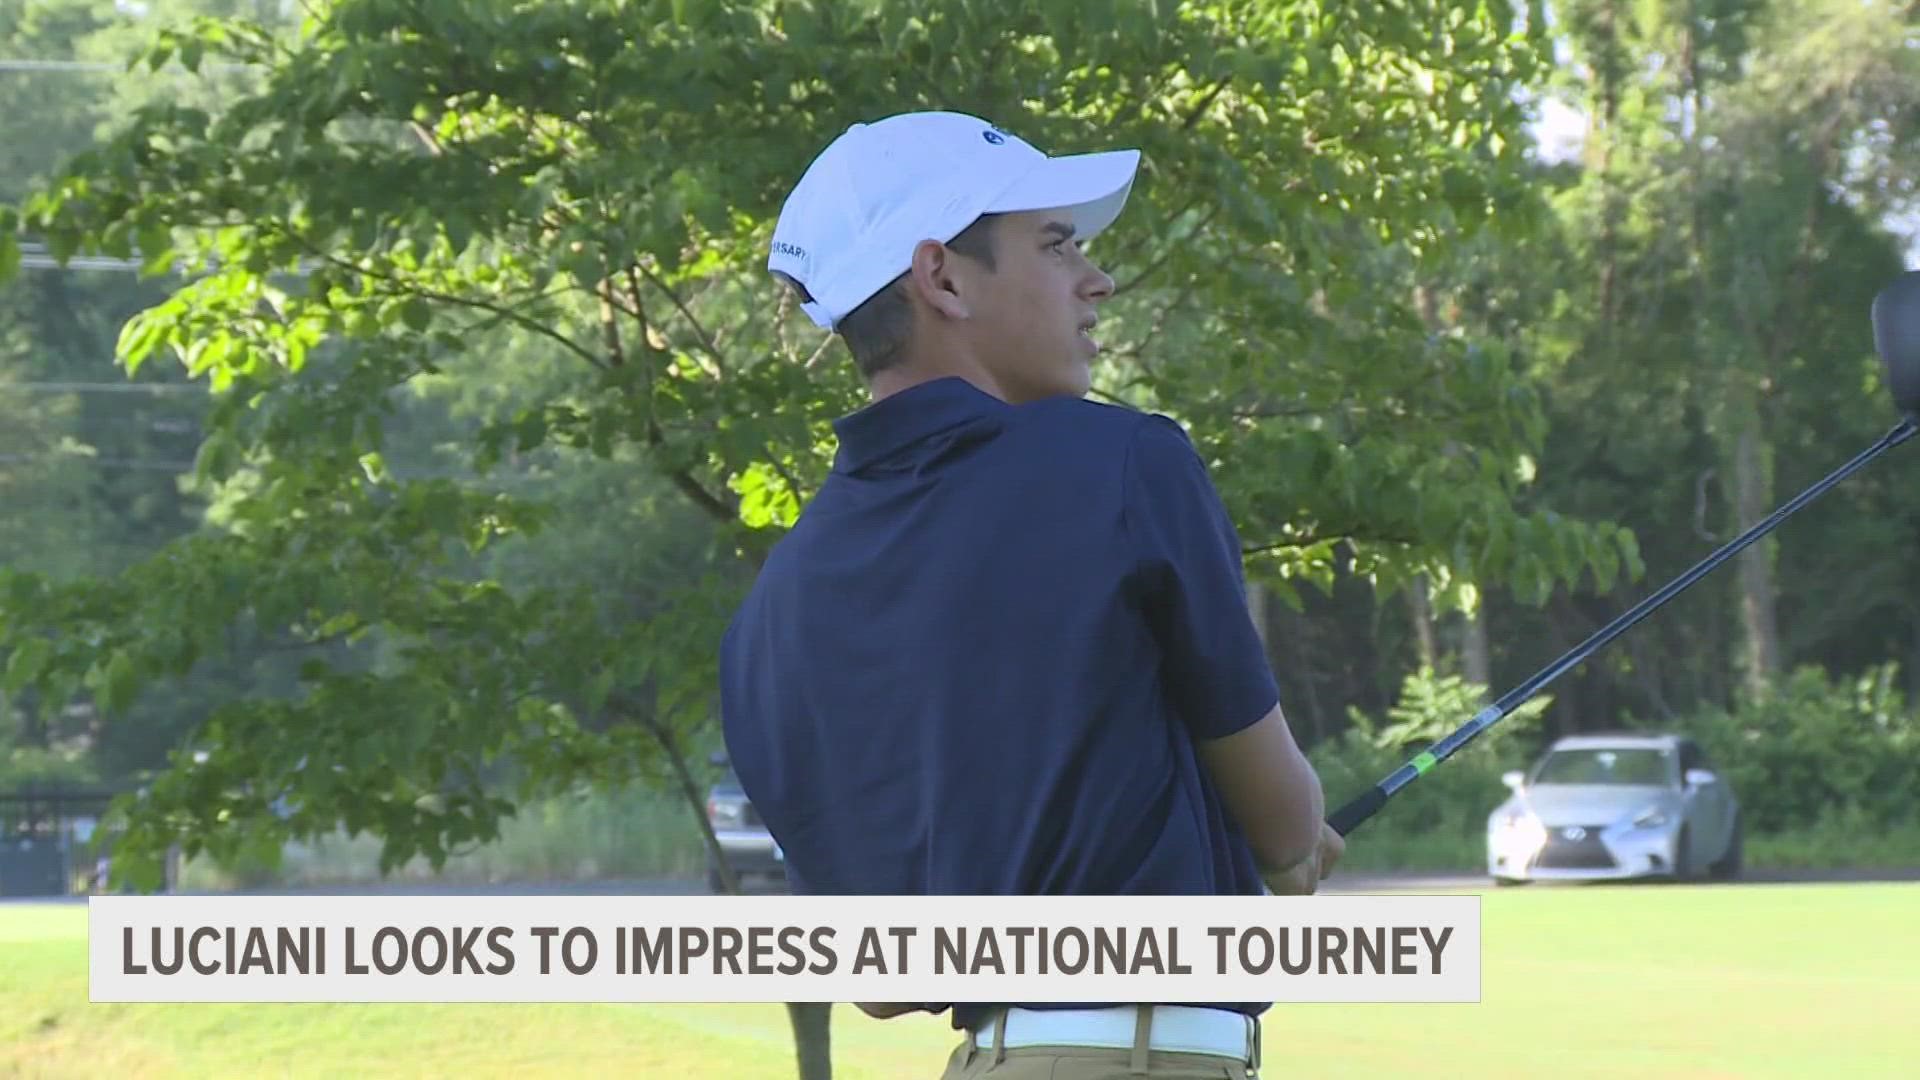 Angelo Luciani is competing for the First Tee National Championship. It's the second year in a row the 16-year-old will play for the national title.